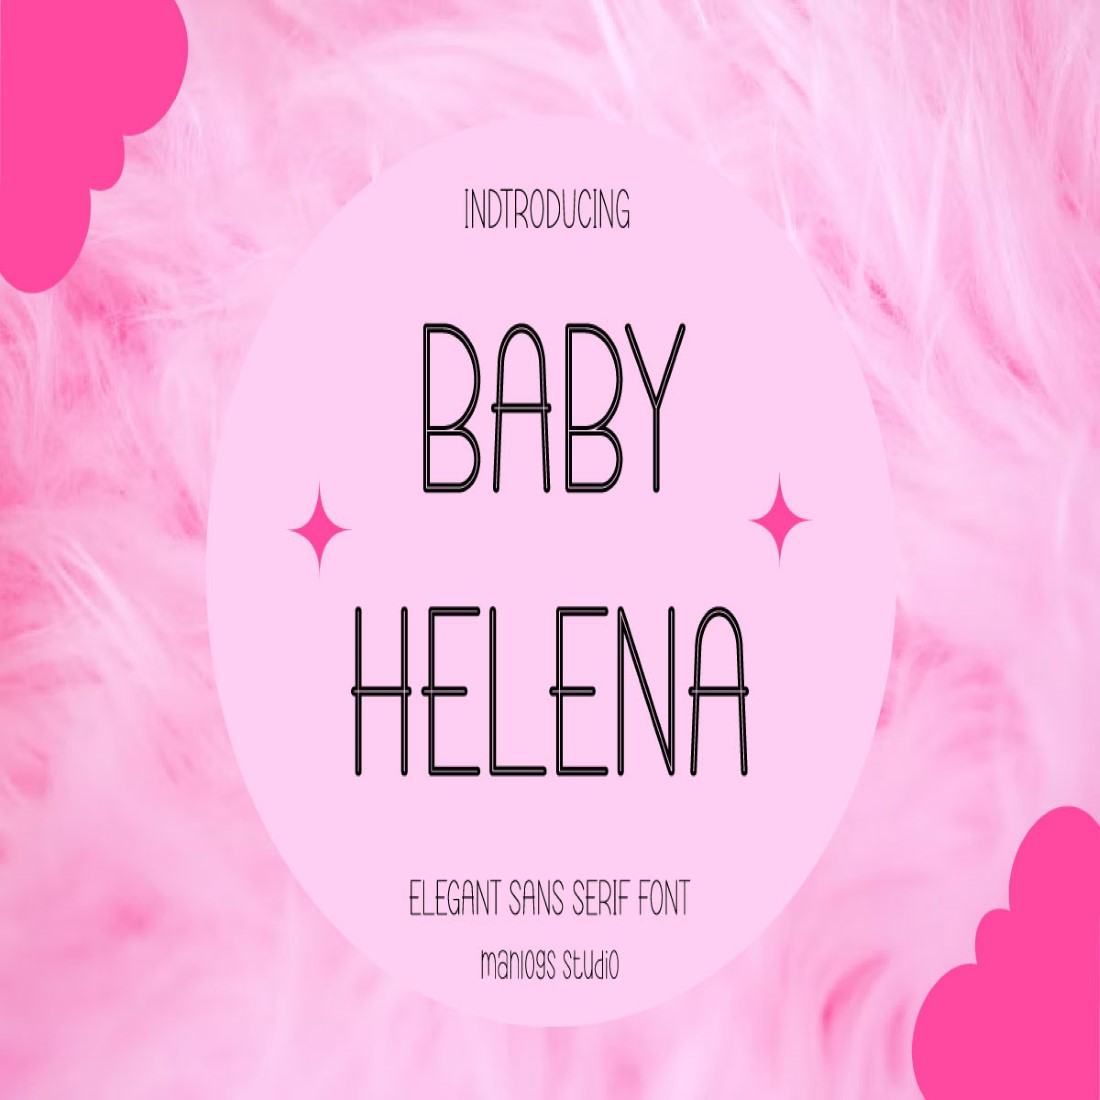 Baby Helena cover image.